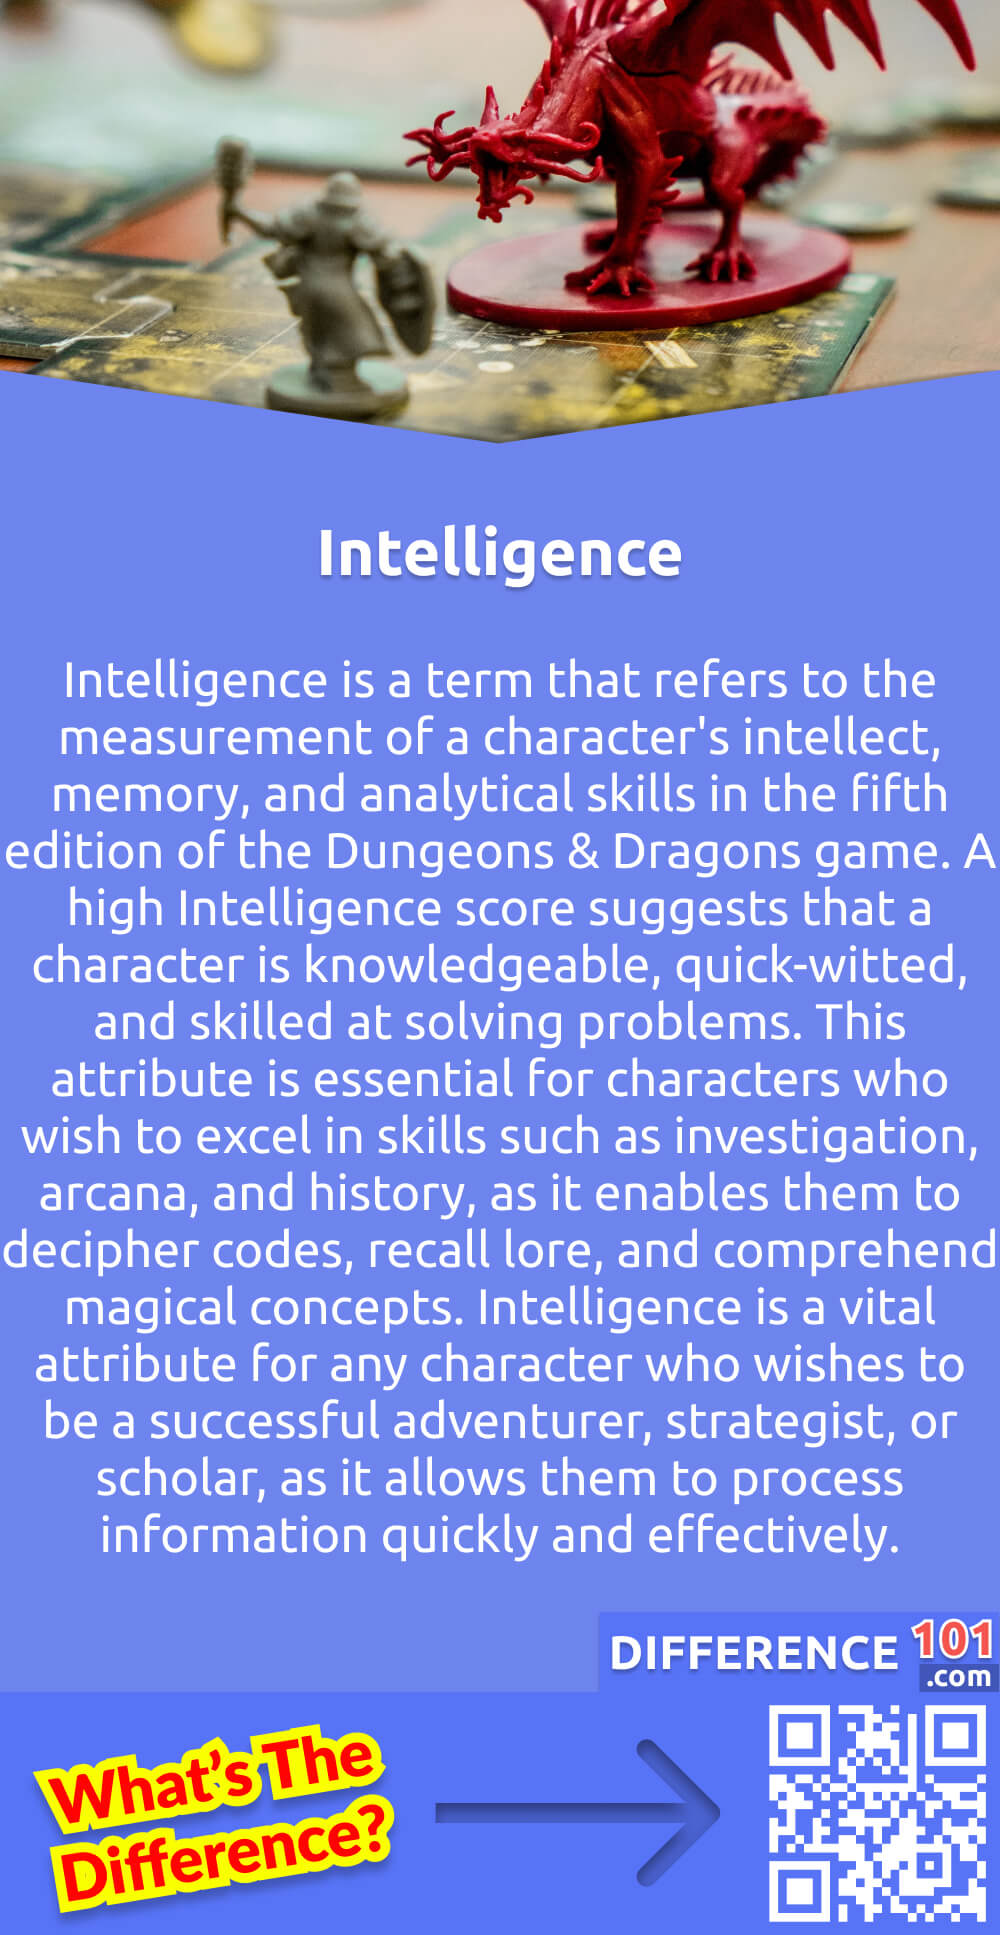 What Is Intelligence? Intelligence is a term that refers to the measurement of a character's intellect, memory, and analytical skills in the fifth edition of the Dungeons & Dragons game. A high Intelligence score suggests that a character is knowledgeable, quick-witted, and skilled at solving problems. This attribute is essential for characters who wish to excel in skills such as investigation, arcana, and history, as it enables them to decipher codes, recall lore, and comprehend magical concepts. Intelligence is a vital attribute for any character who wishes to be a successful adventurer, strategist, or scholar, as it allows them to process information quickly and effectively.